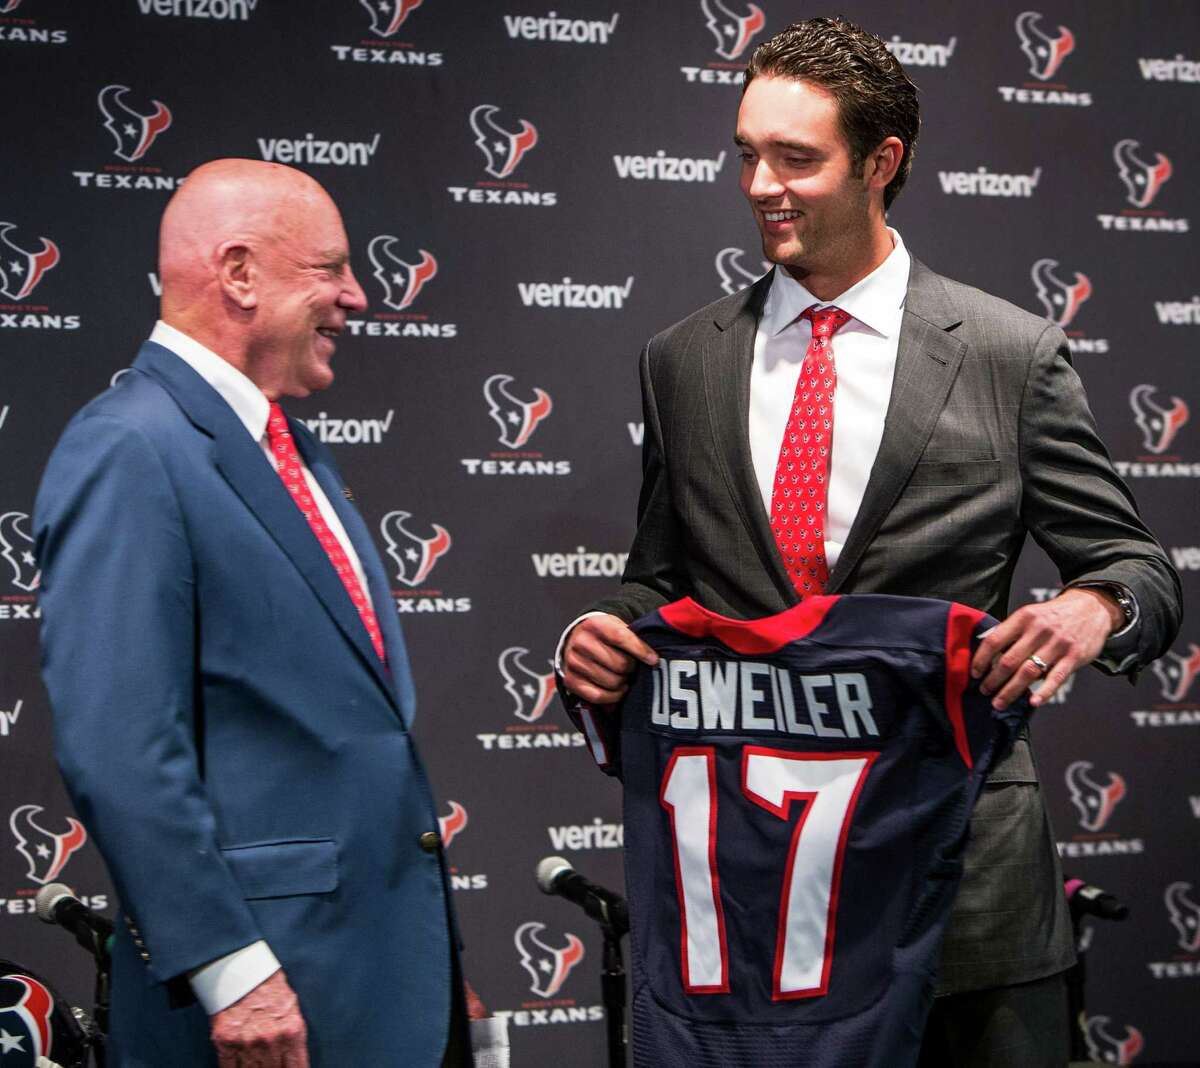 Quarterback Brock Osweiler is welcomed to Houston by Texans owner Bob McNair on Thursday.